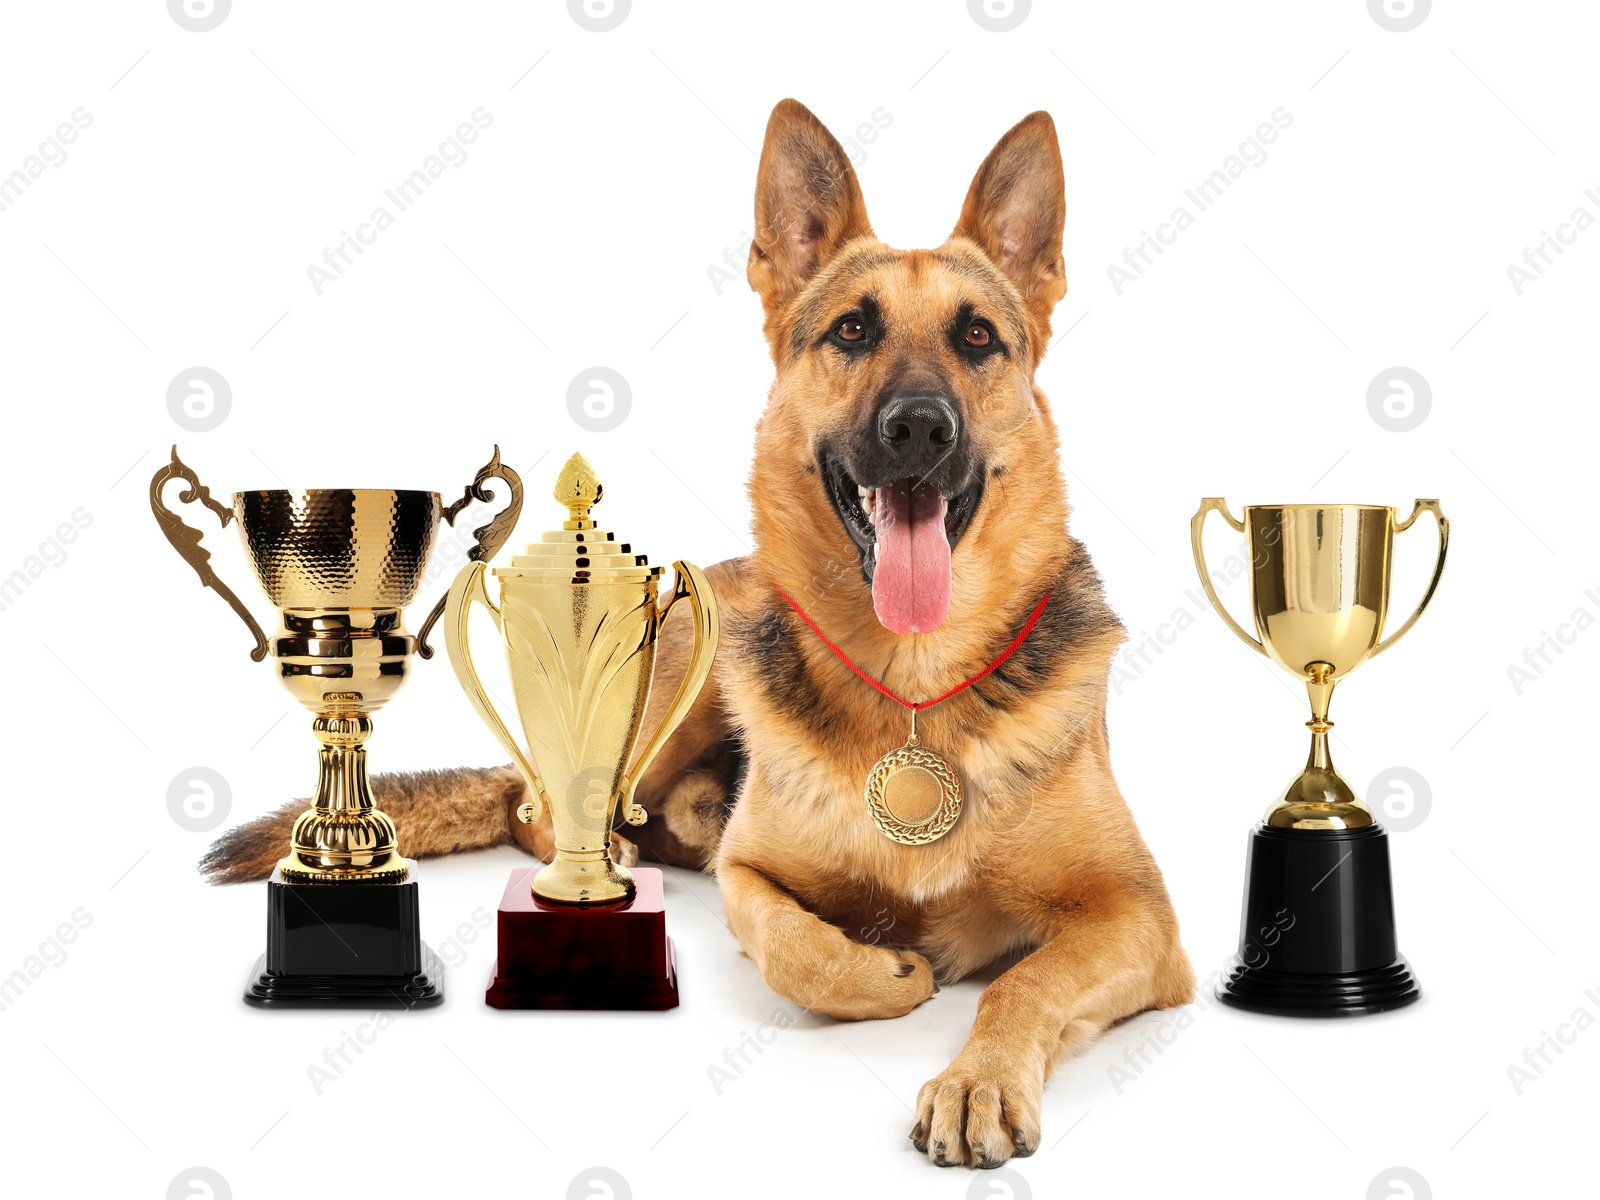 Image of Cute German shepherd dog with gold medal and trophy cups on white background